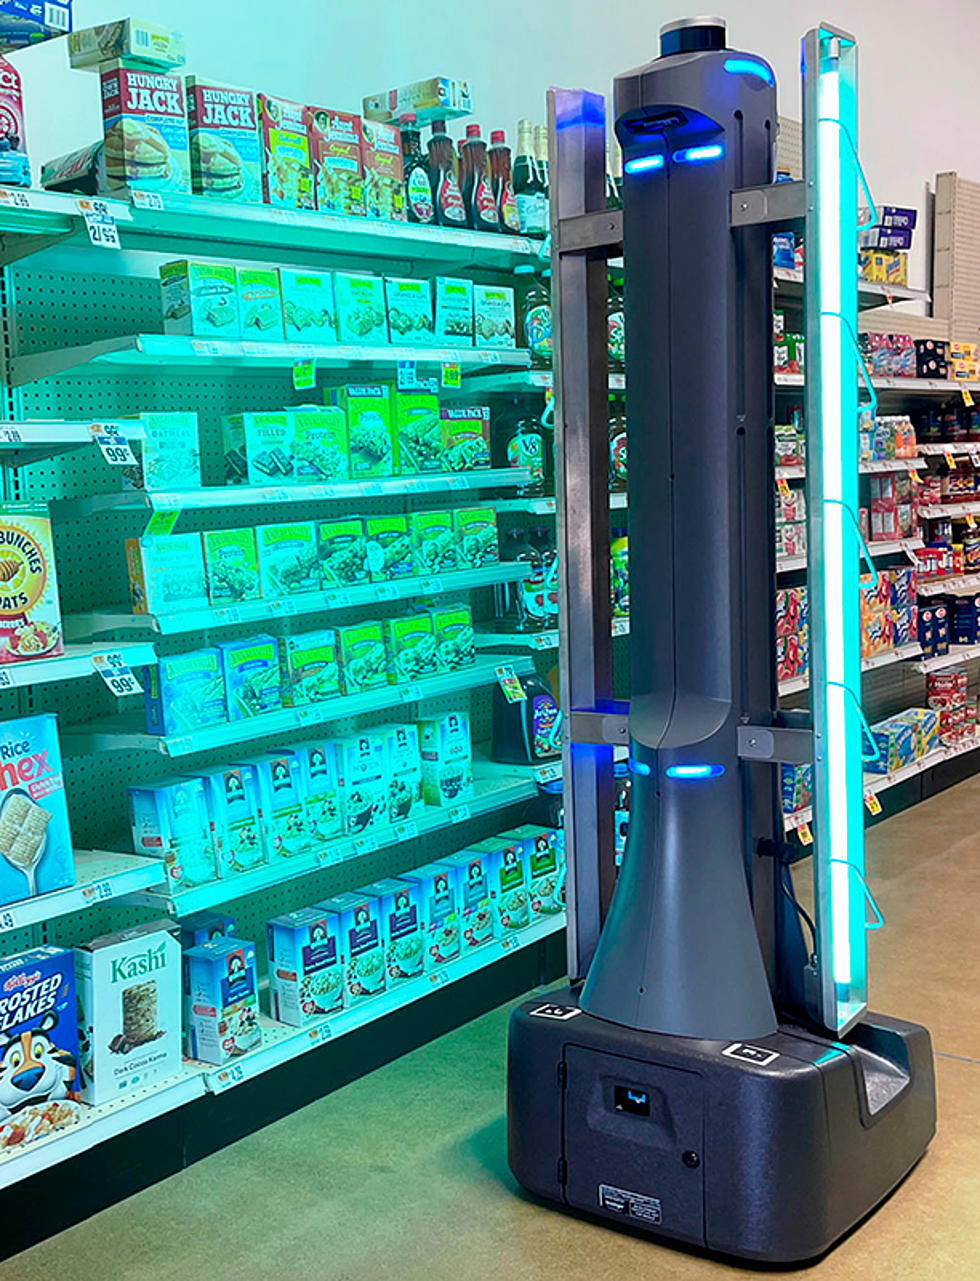 Illinois Store Deploys a Robot to Improve Customer Experience